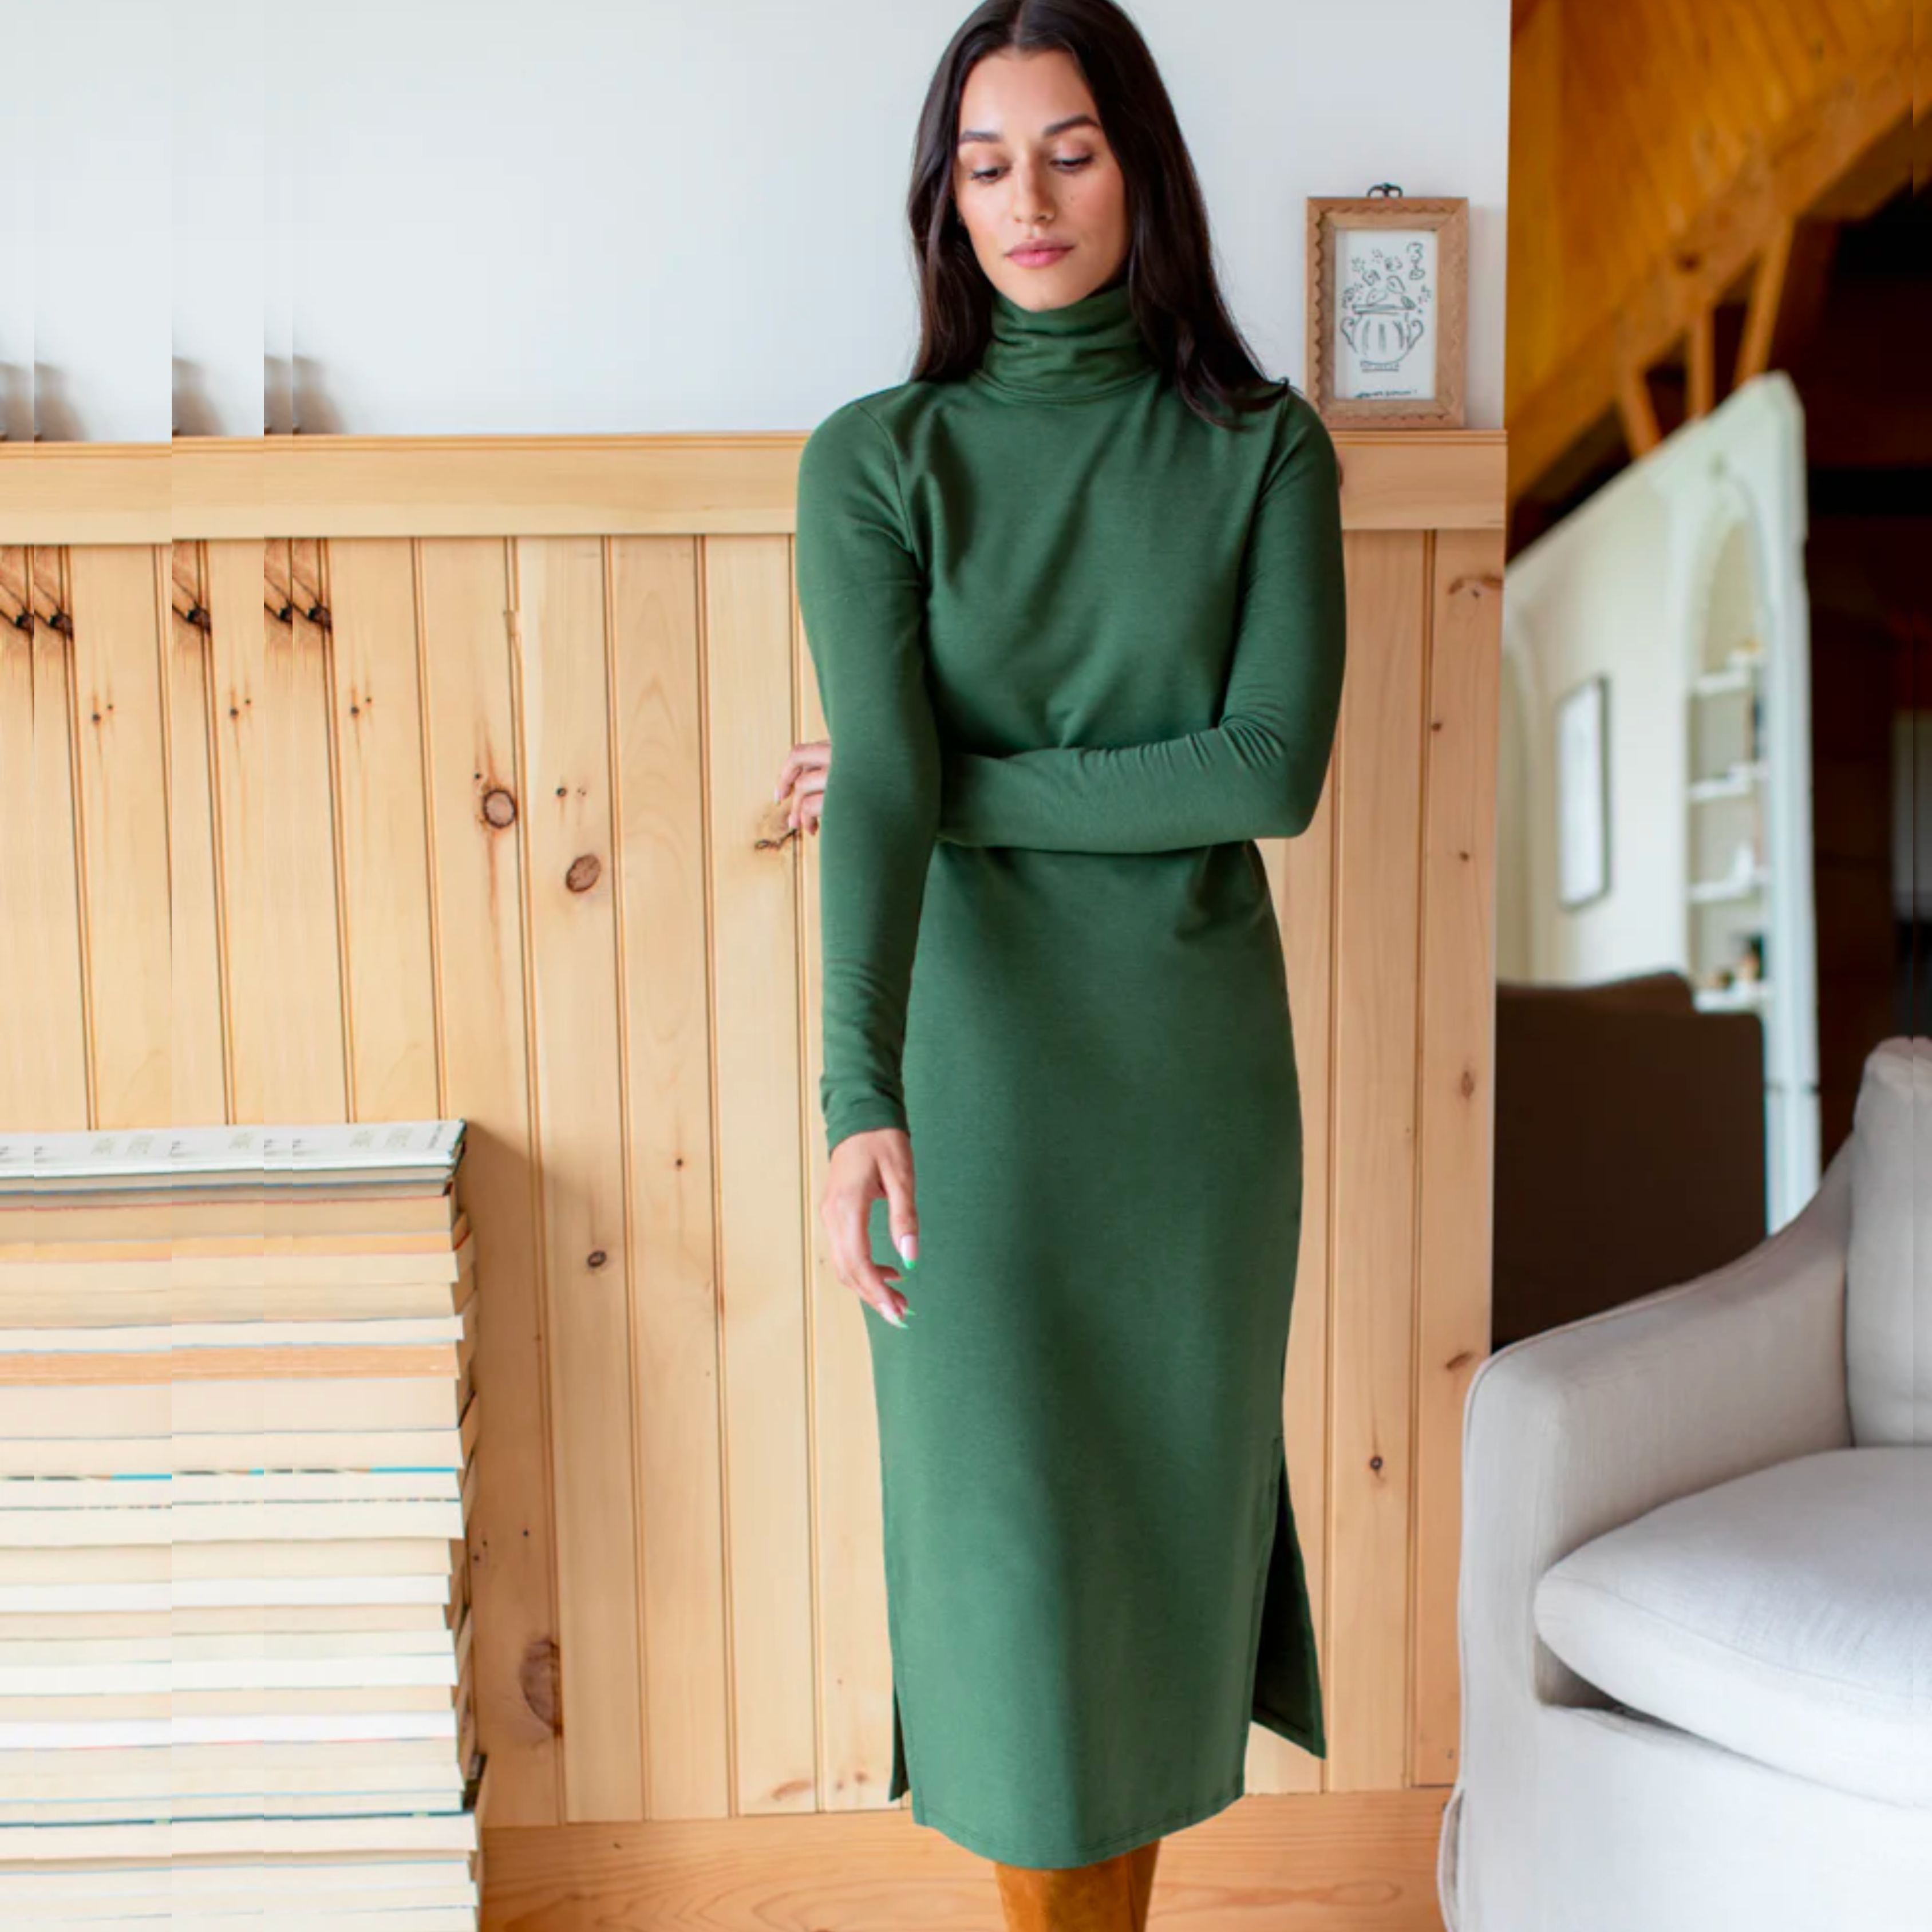 Emerson Fry  Turtleneck Dress – The Warehouse Collective